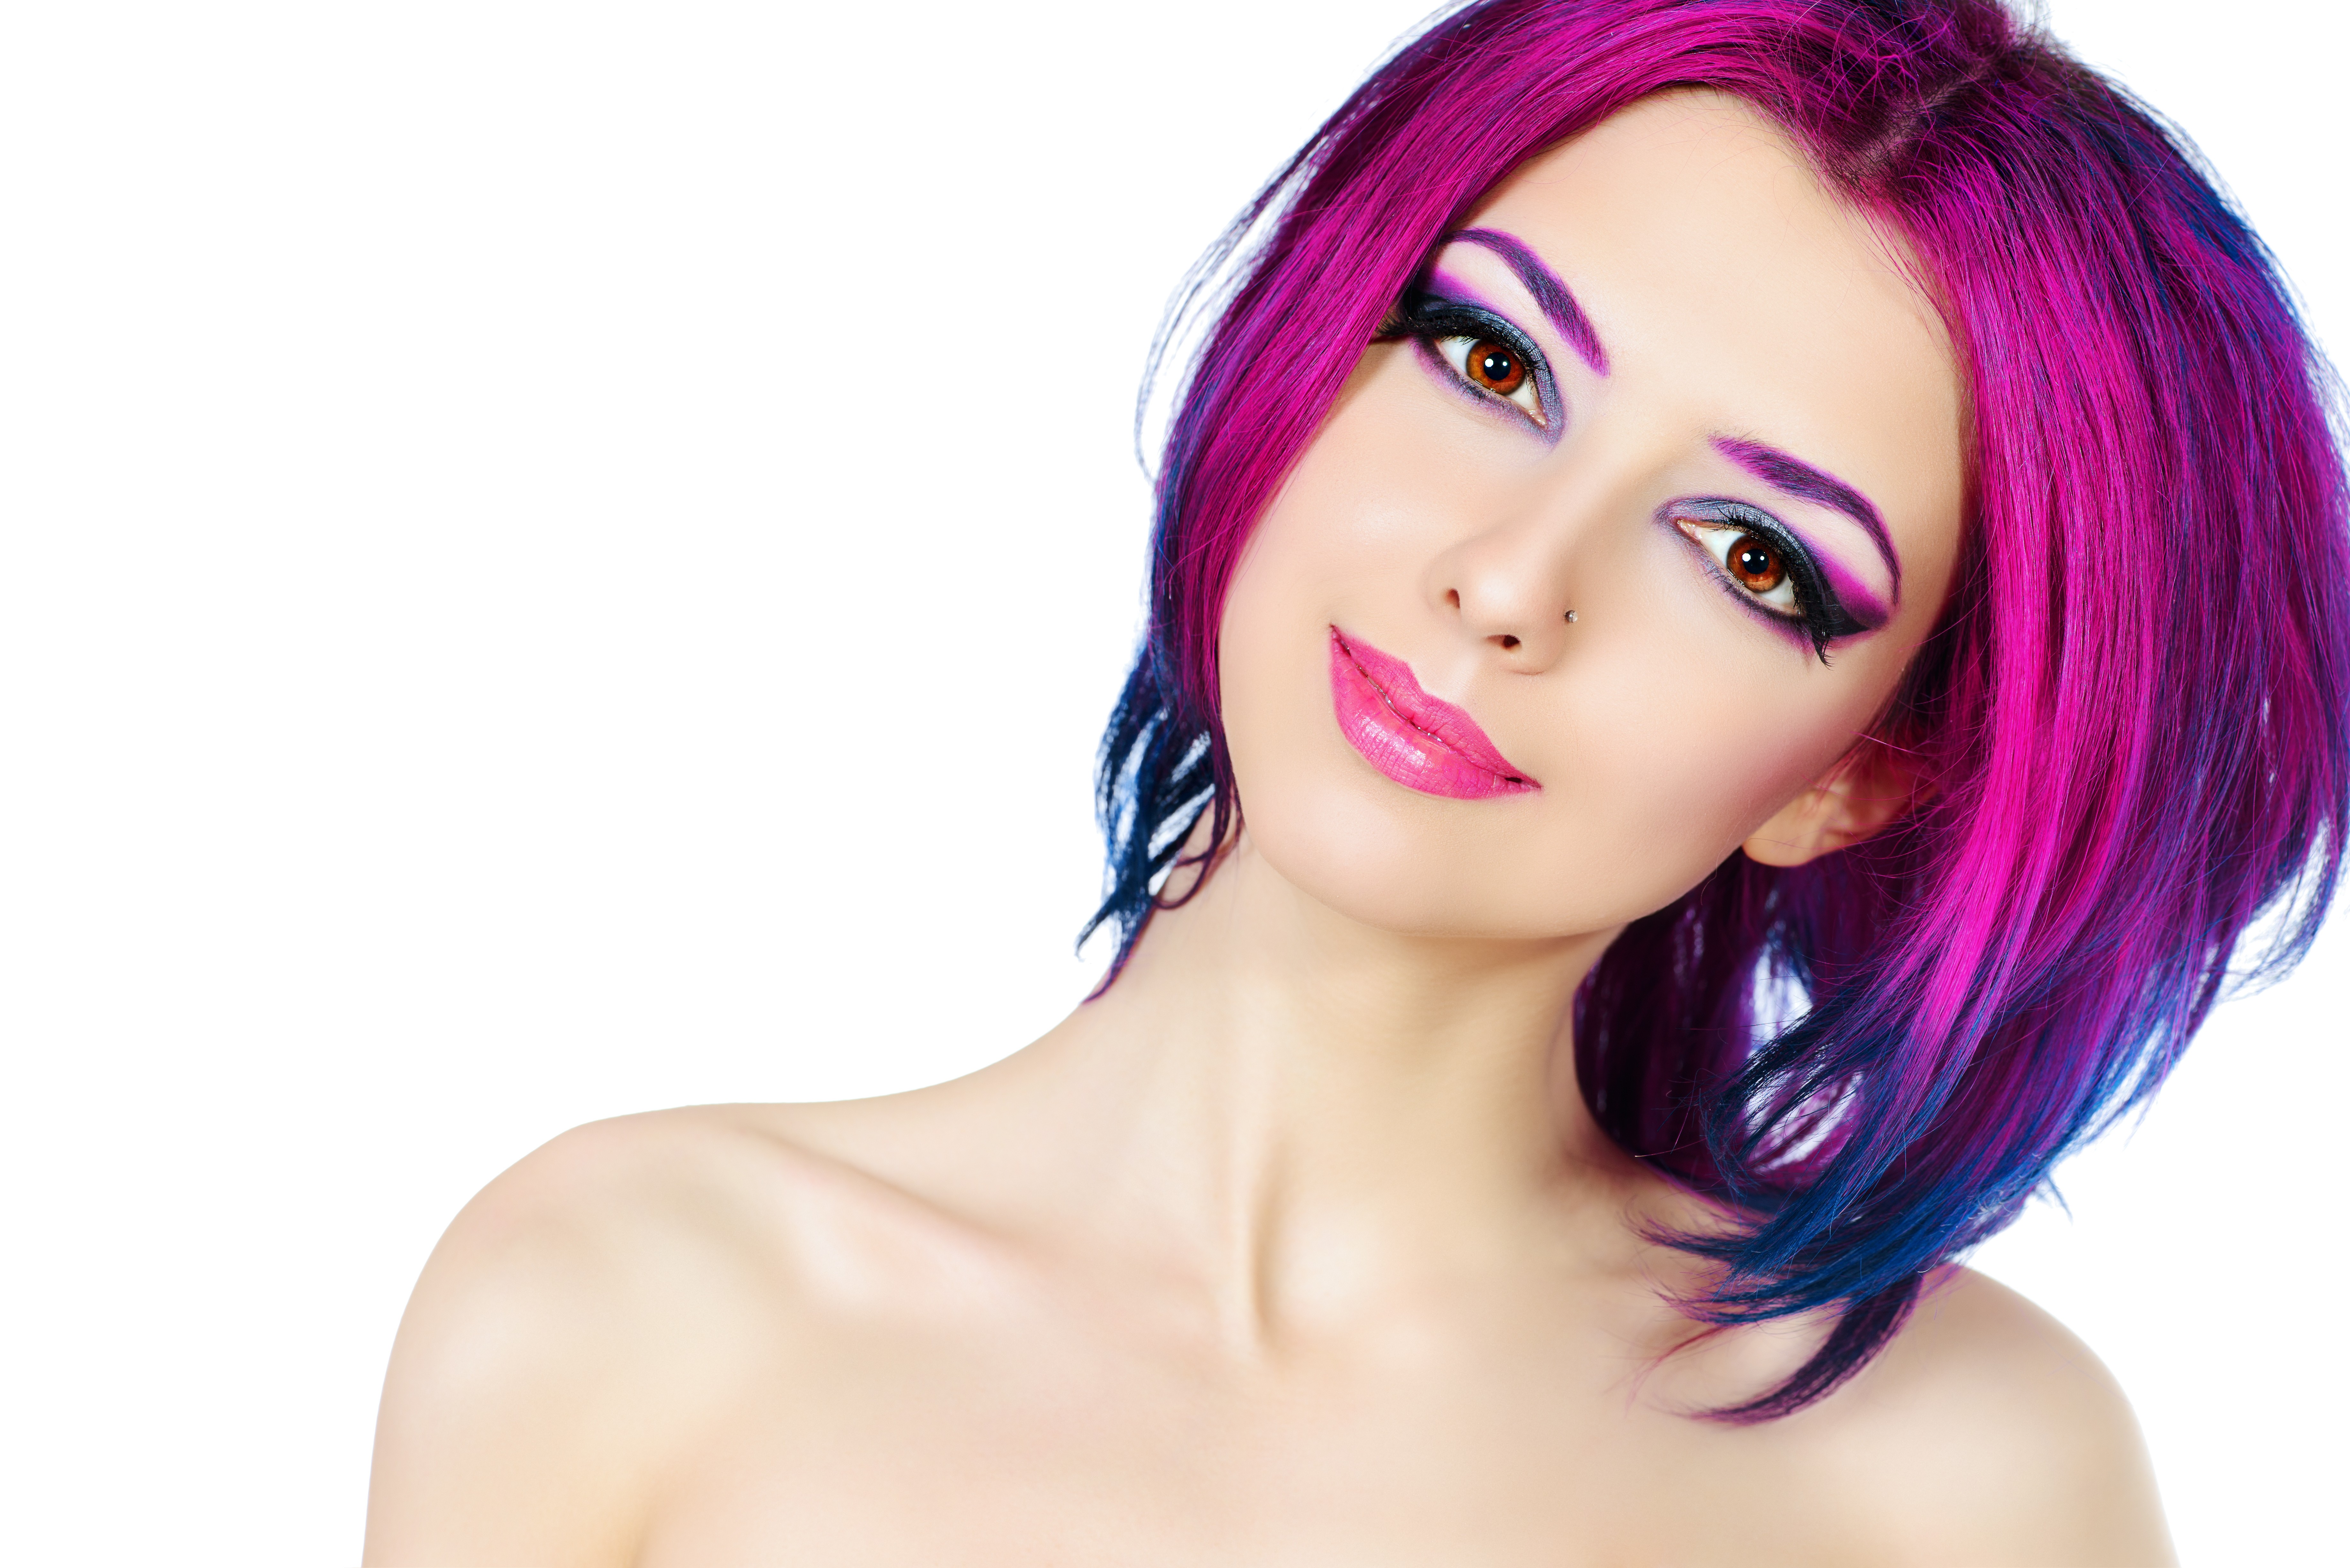 People 7360x4912 women face portrait dyed hair piercing makeup lipstick simple background white background looking at viewer women indoors studio bare shoulders pink hair purple hair gradient hair dyed eyebrows pink lipstick